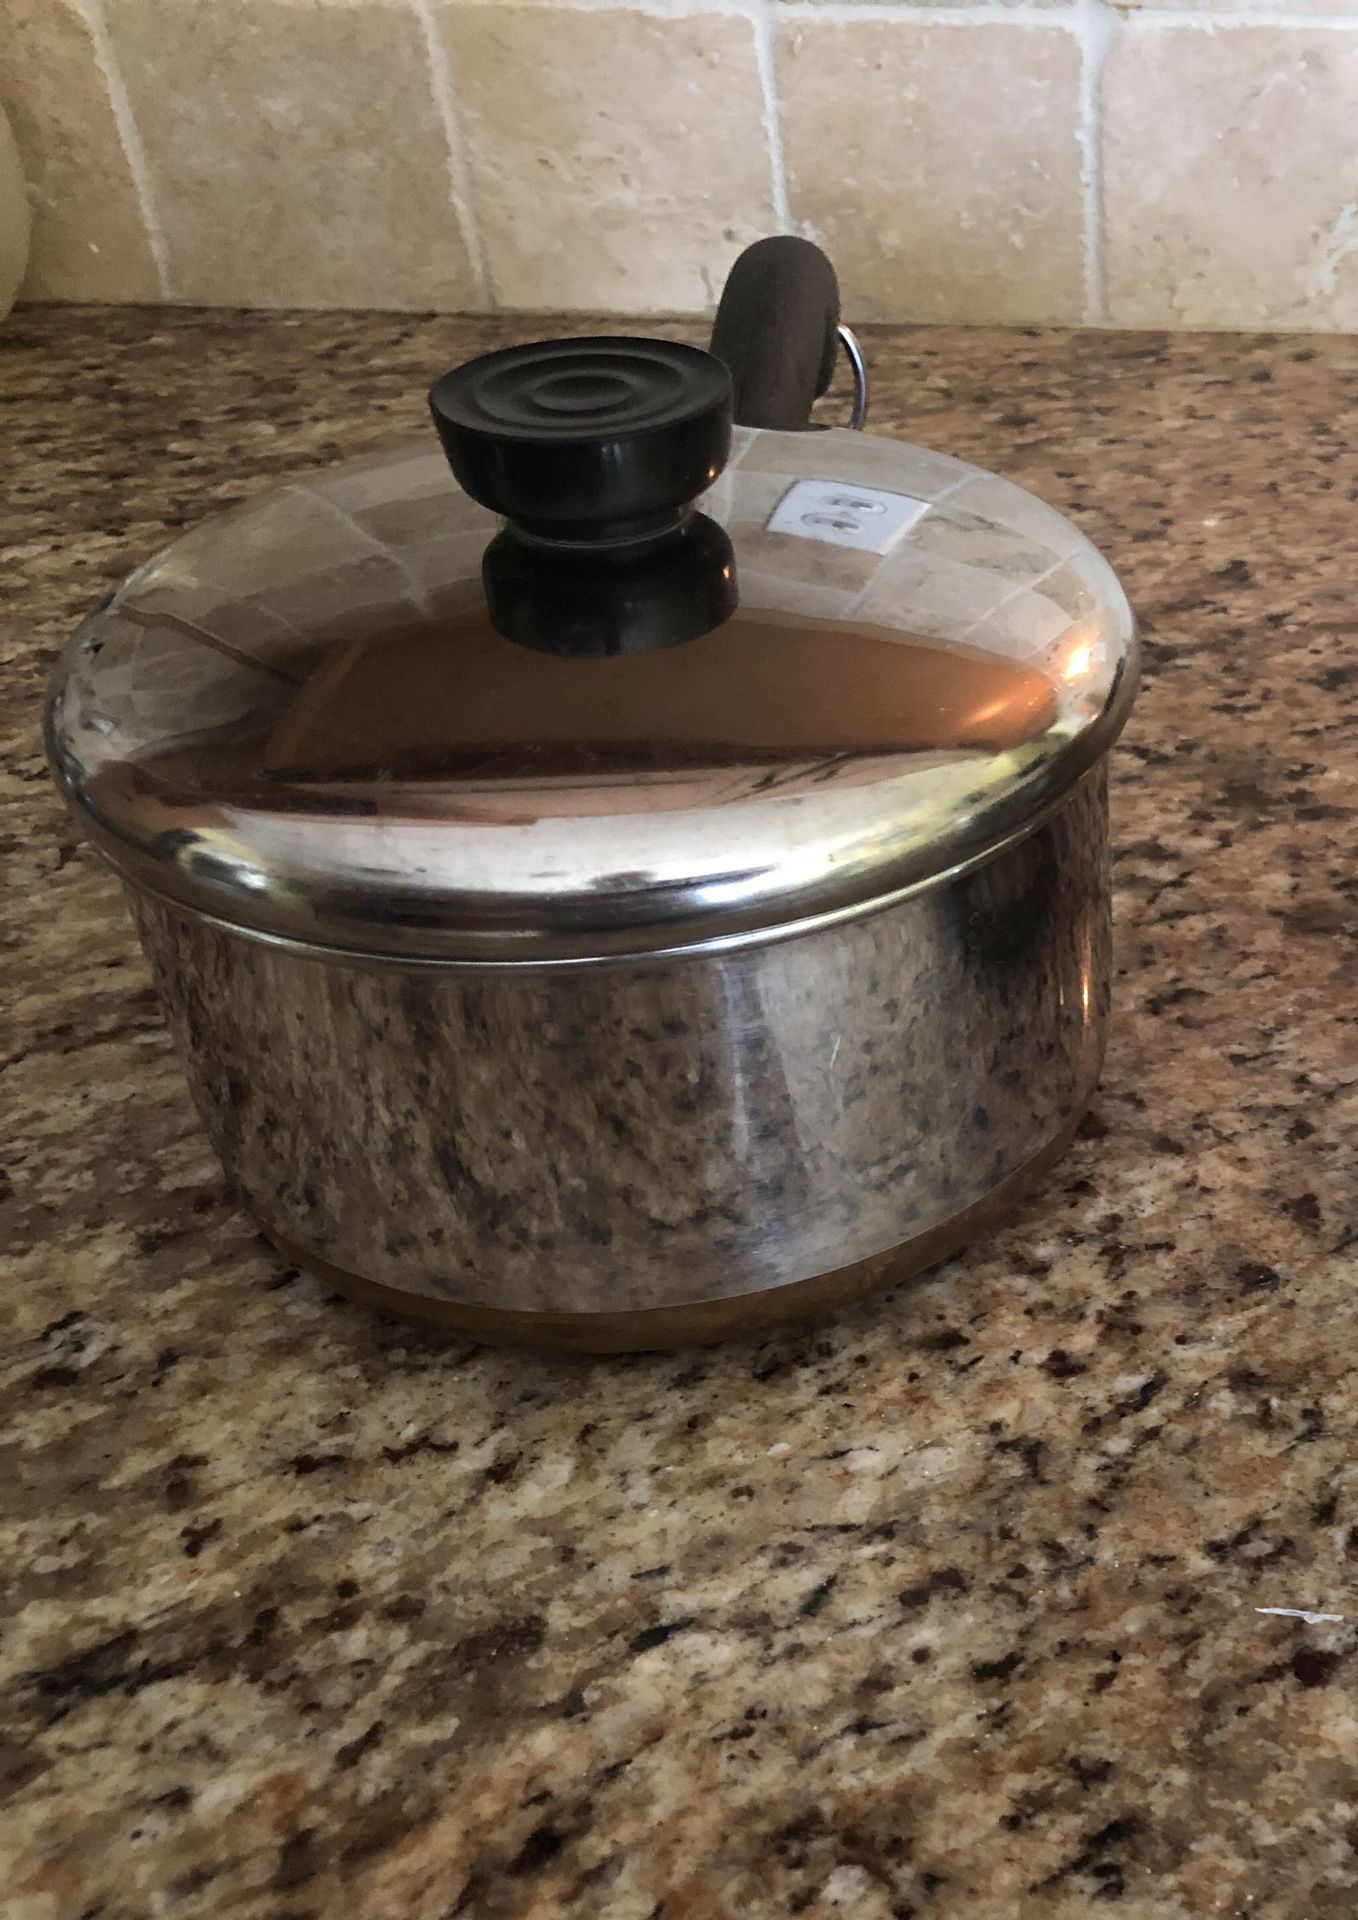 Revereware sauce pans with lids, stainless steel copper bottoms